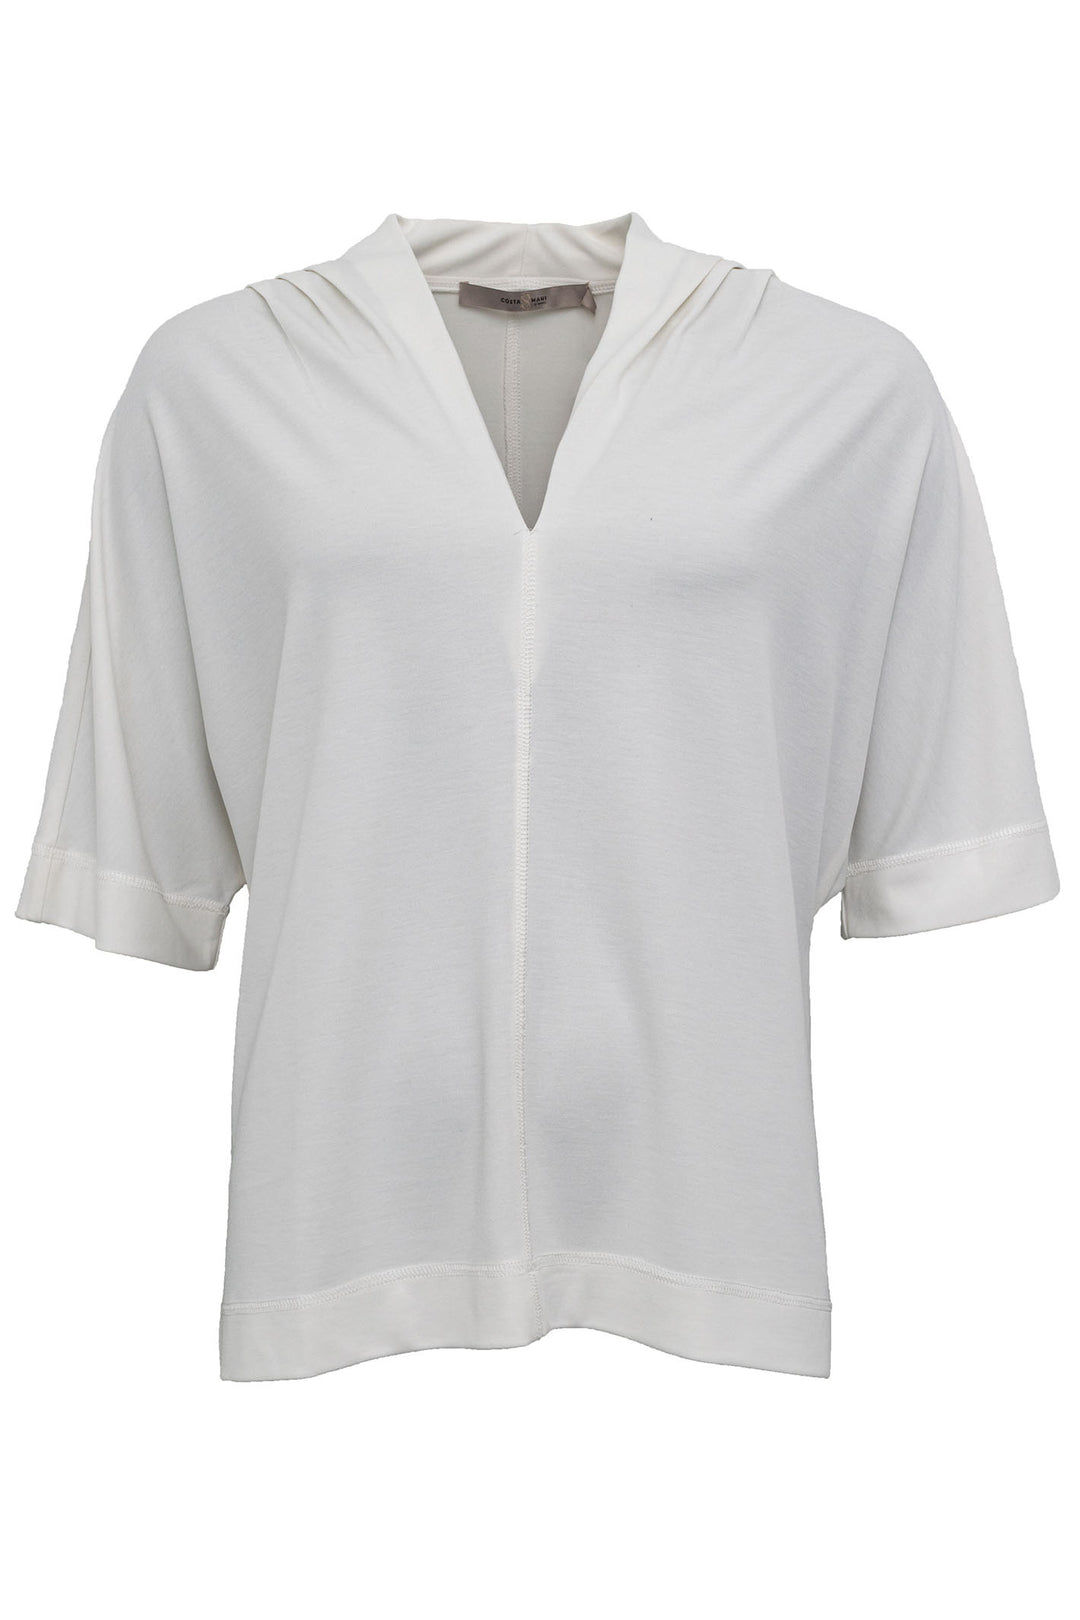 Costa Mani 2401150 White Claccy V-Neck Top - Experience Boutique